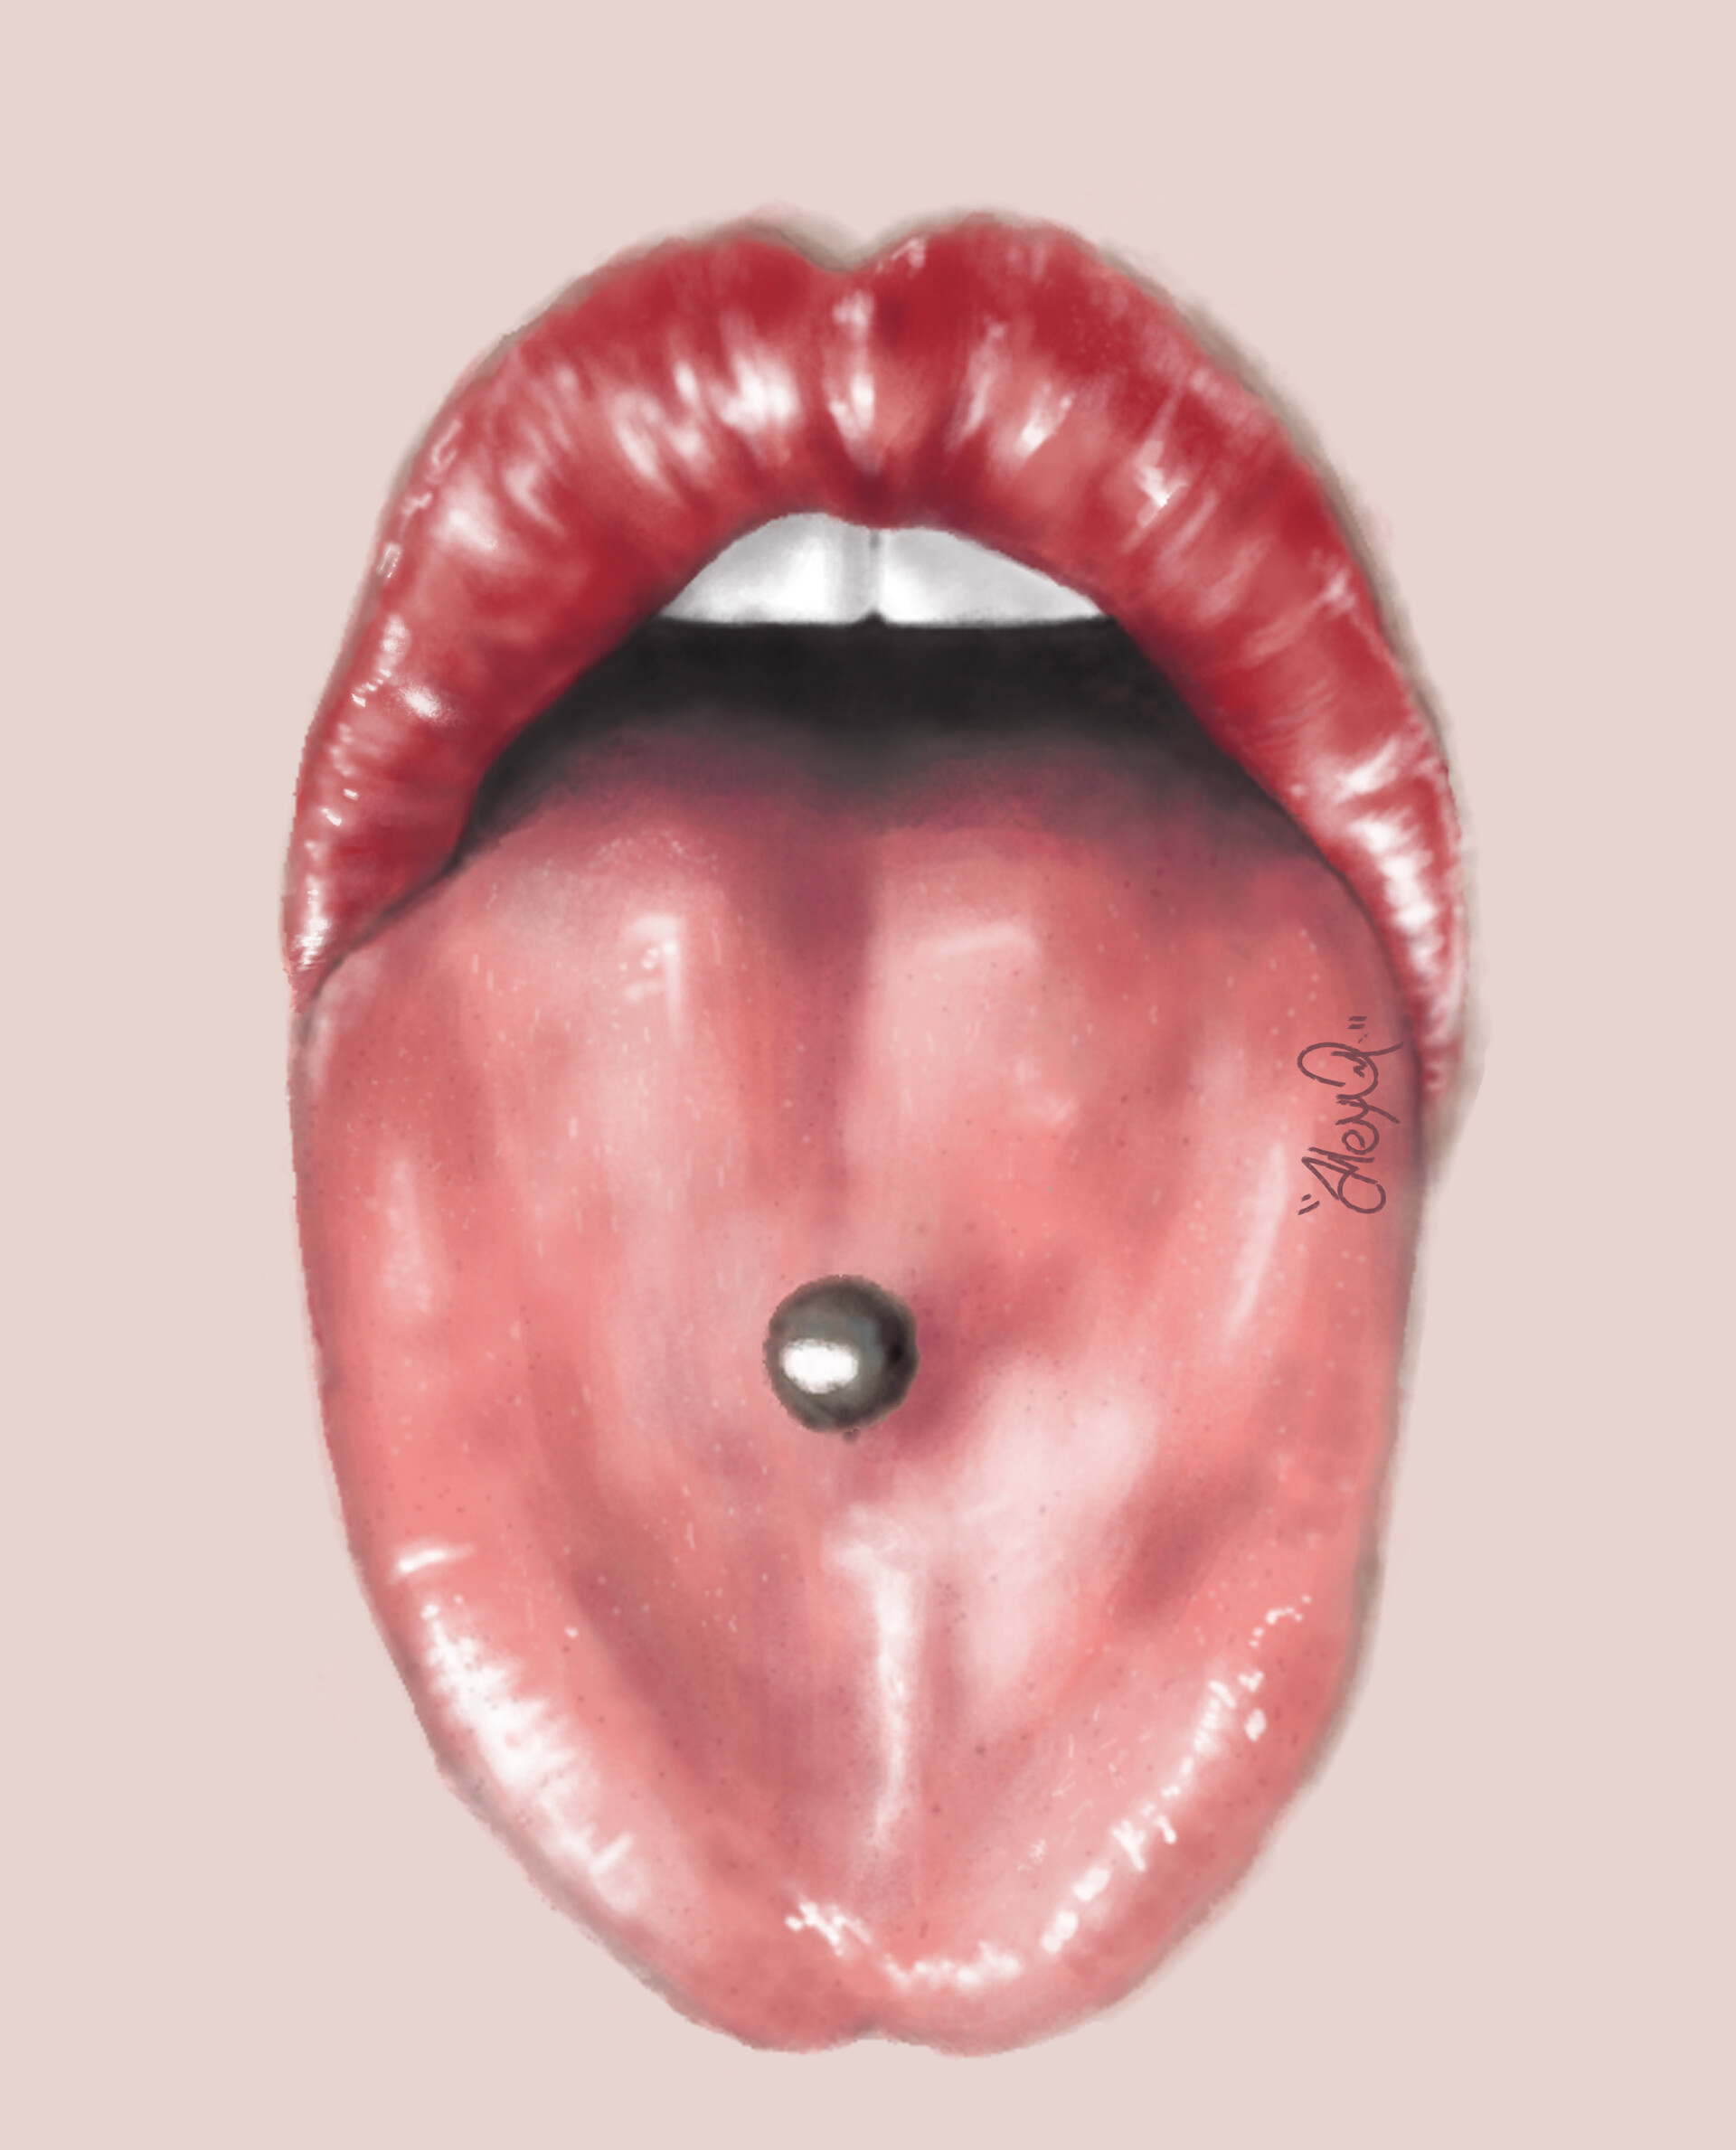 lip drawings with piercing